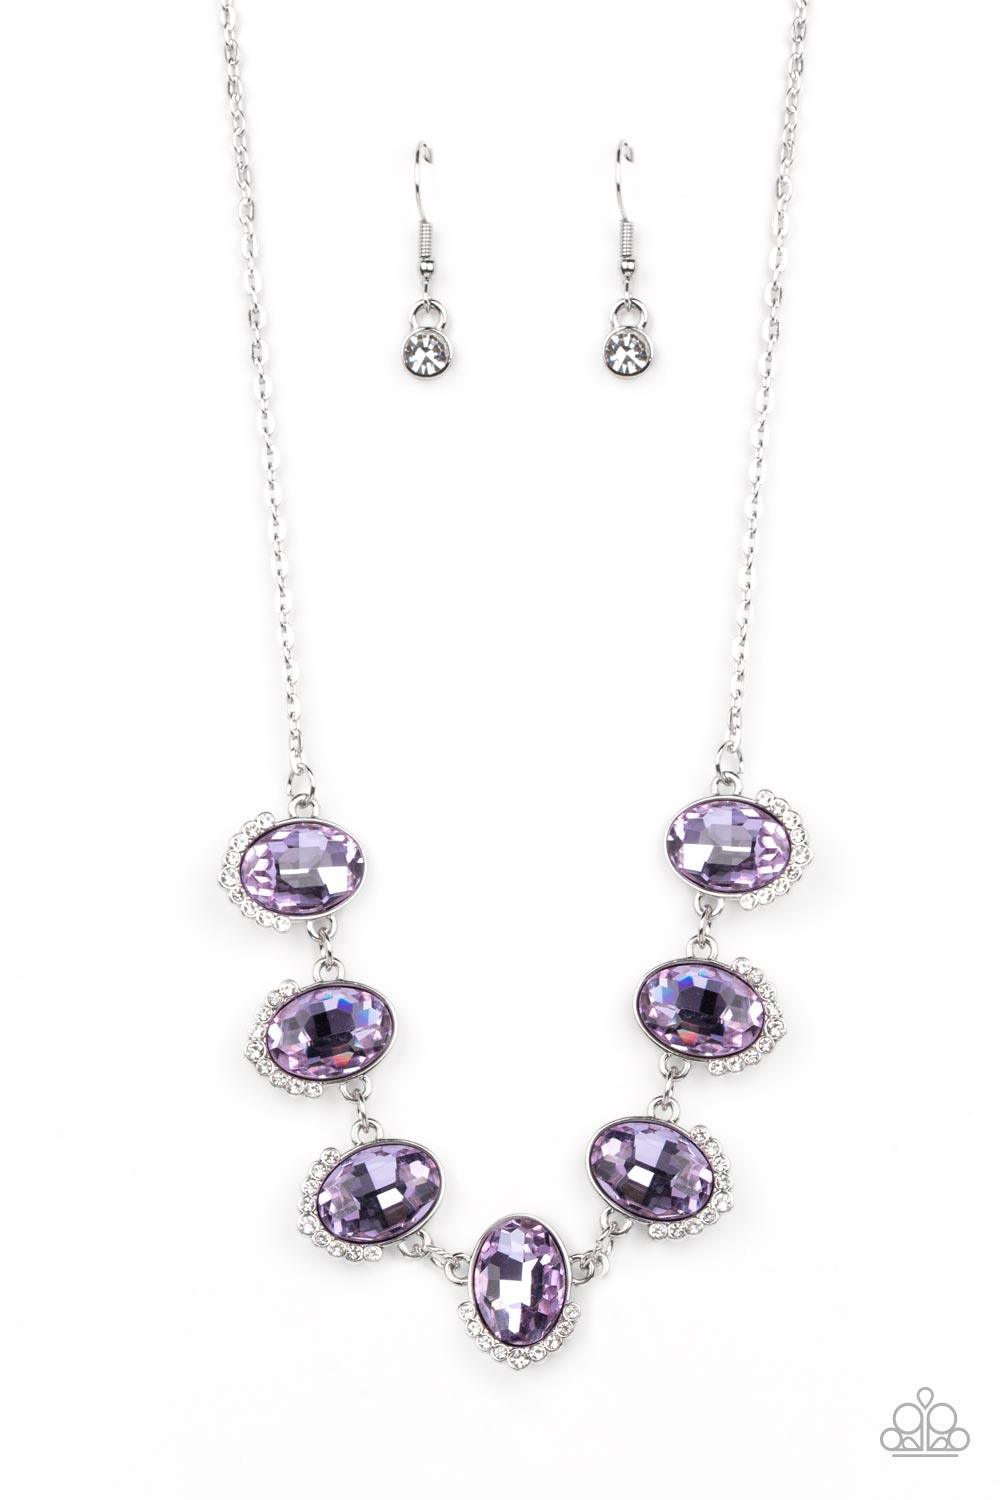 Violet and Clear CZ Rhinestone V Shape Prom Necklace Set | Prom Jewelry |  L&M Bling - lmbling